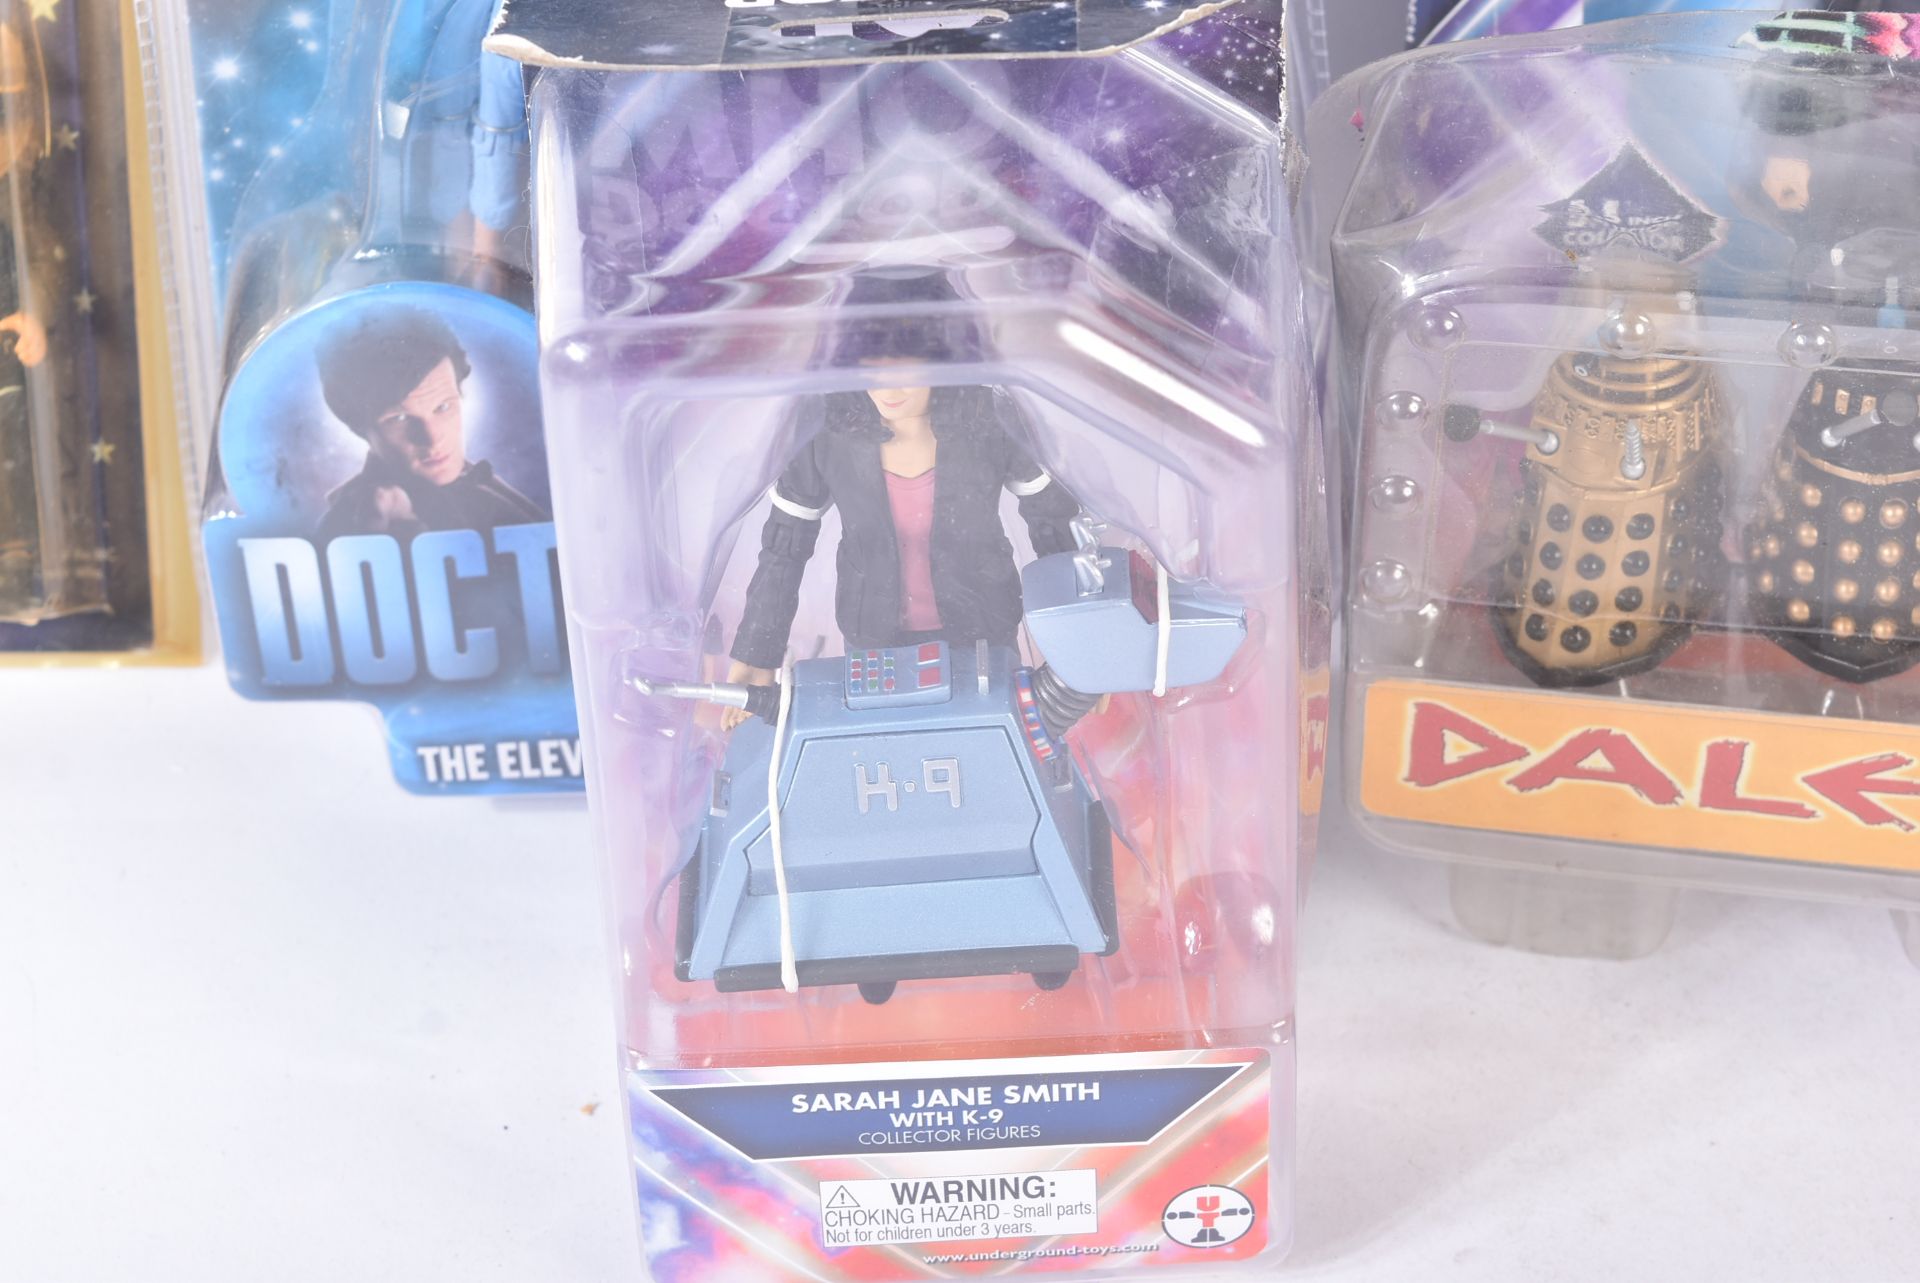 DOCTOR WHO - COLLECTION OF ASSORTED ACTION FIGURES - Image 3 of 7